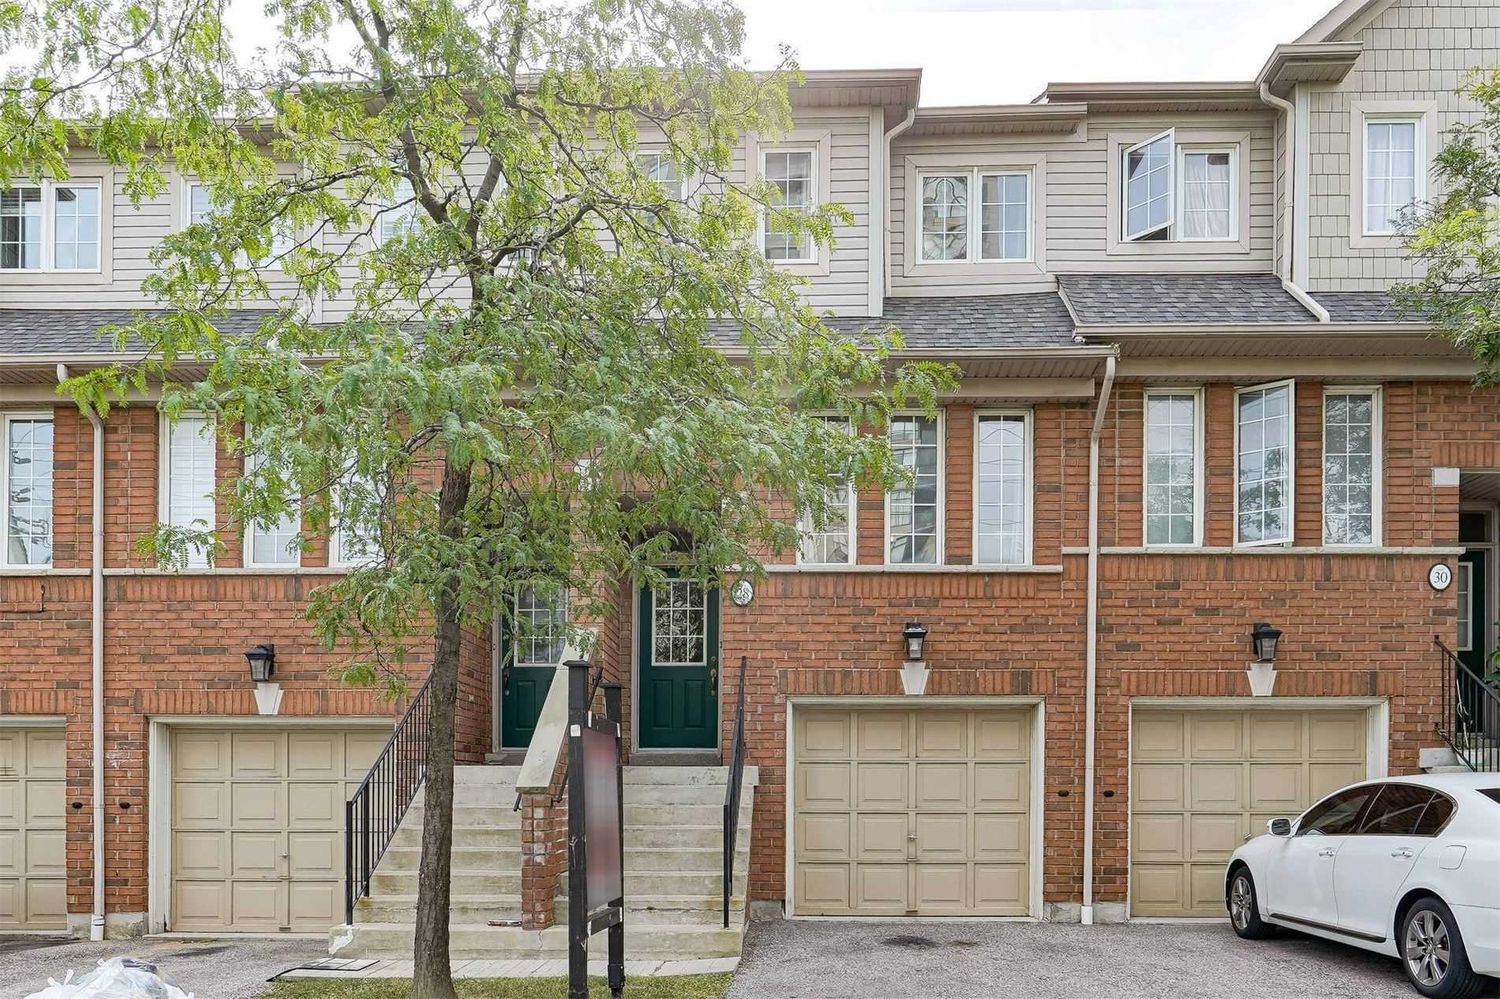 159-185 Trudeau Avenue. 4950 Albina Way Townhomes is located in  Mississauga, Toronto - image #2 of 2